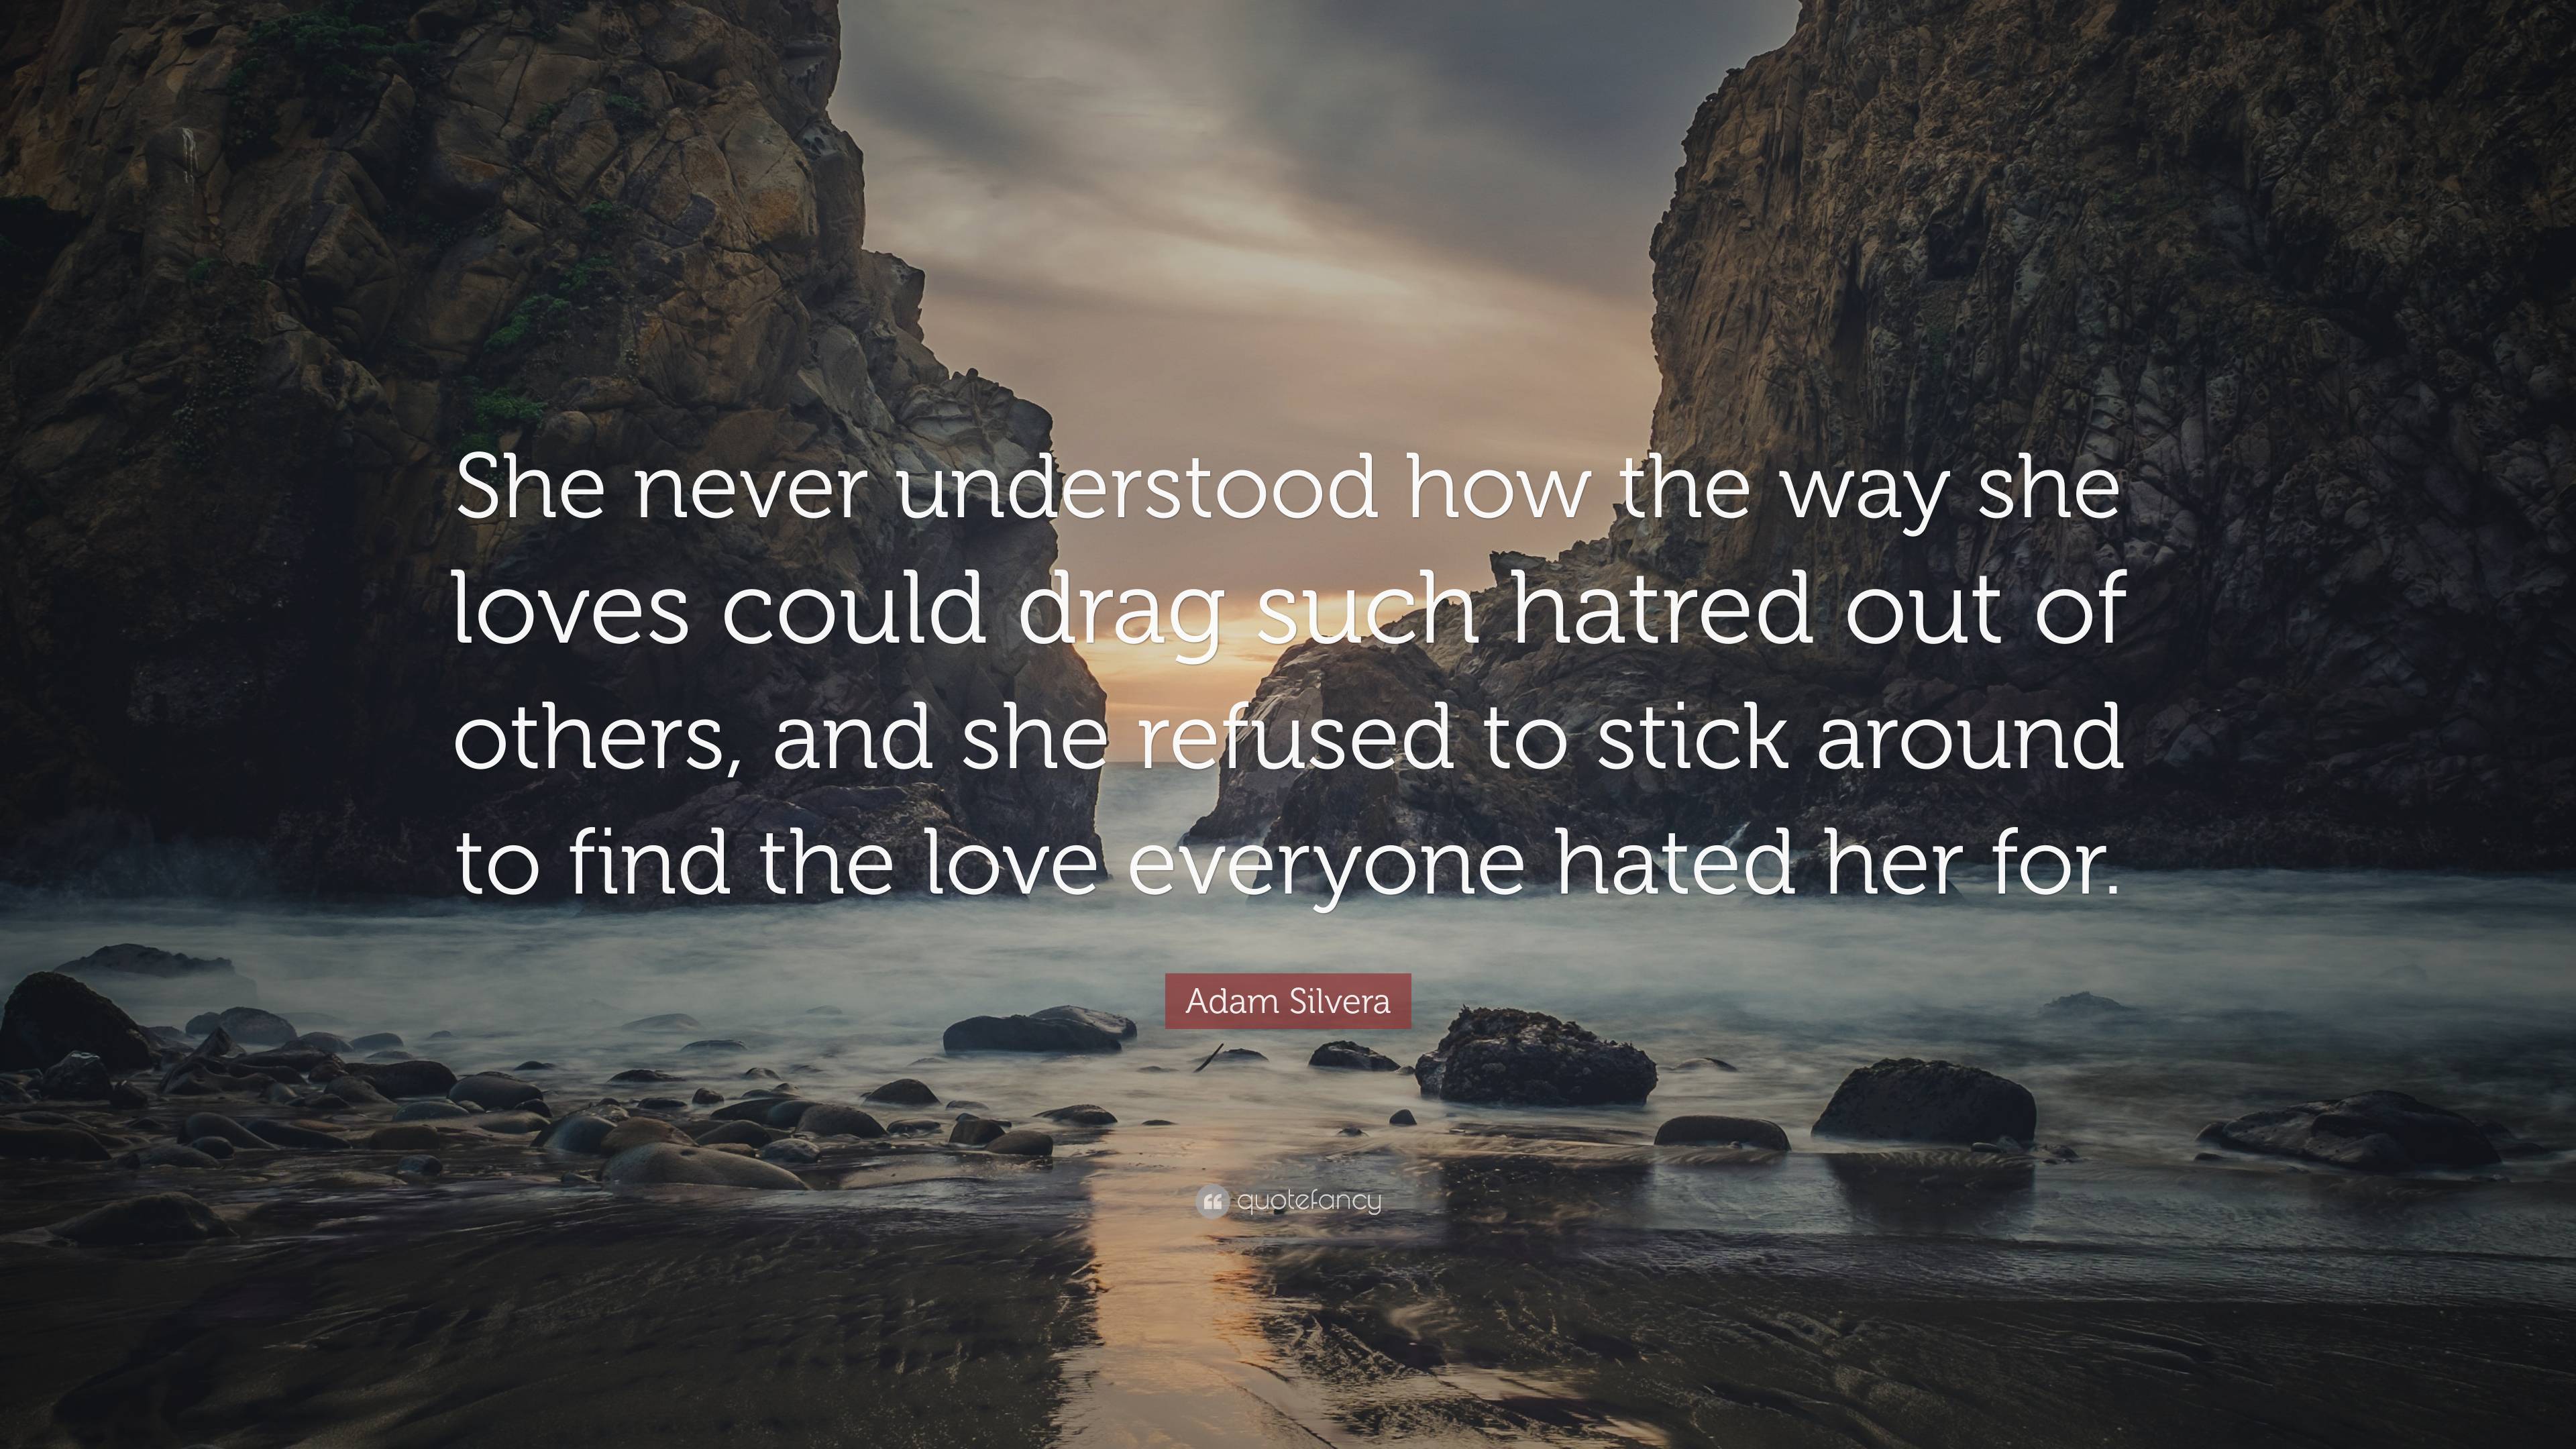 Adam Silvera Quote: “She never understood how the way she loves could ...